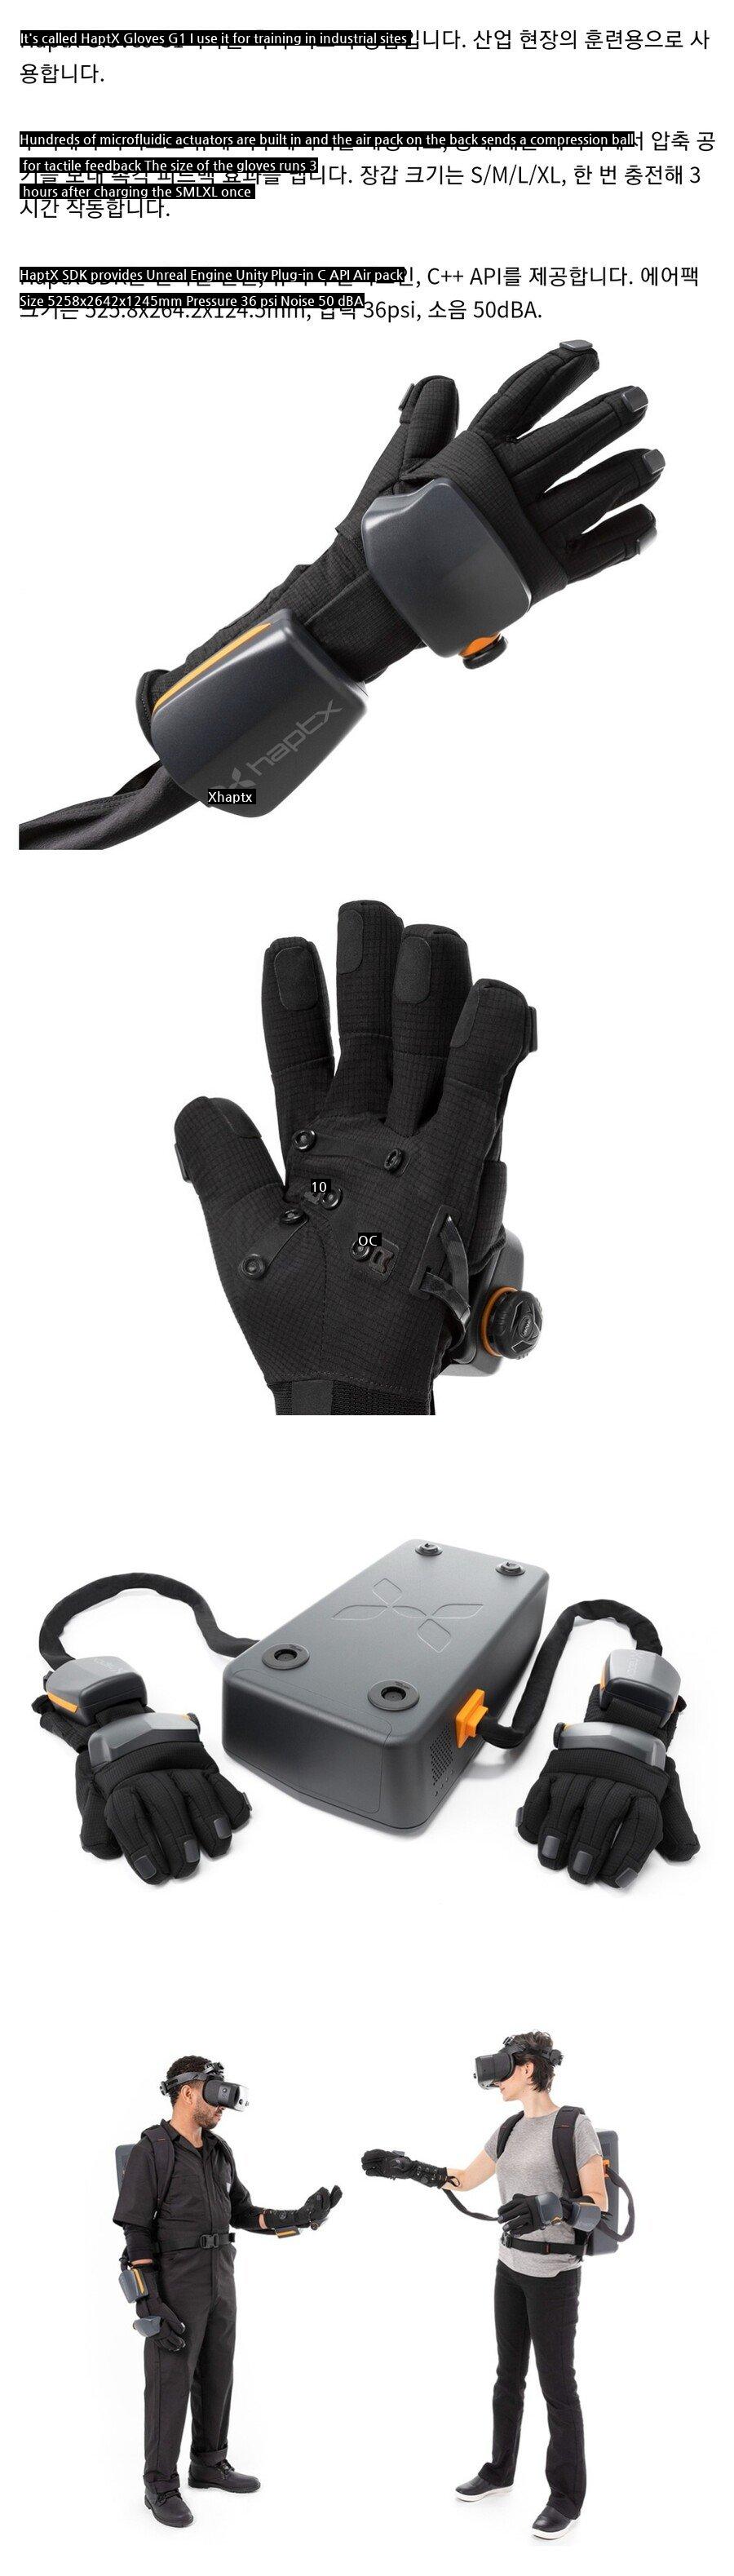 Gloves that you can feel with VR